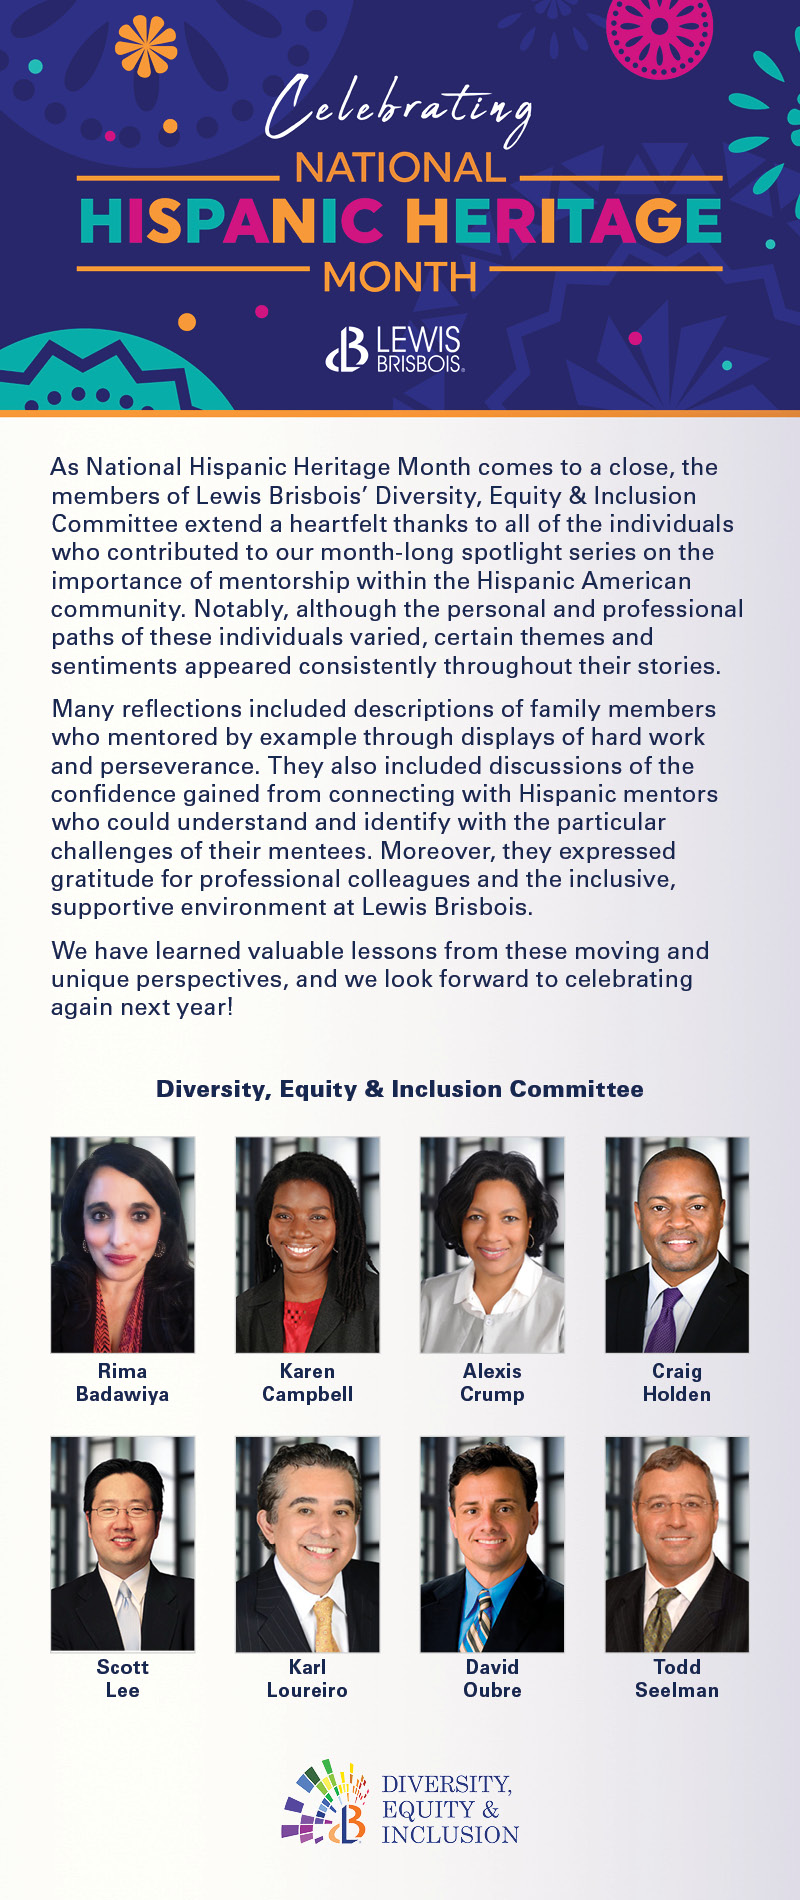 As National Hispanic Heritage Month comes to a close, the members of Lewis Brisbois’ Diversity, Equity & Inclusion Committee extend a heartfelt thanks to all of the individuals who contributed to our month-long spotlight series on the importance of mentorship within the Hispanic American community. Notably, although the personal and professional paths of these individuals varied, certain themes and sentiments appeared consistently throughout their stories.      Many reflections included descriptions of family members who mentored by example through displays of hard work and perseverance. They also included discussions of the confidence gained from connecting with Hispanic mentors who could understand and identify with the particular challenges of their mentees. Moreover, they expressed gratitude for professional colleagues and the inclusive, supportive environment at Lewis Brisbois.      We have learned valuable lessons from these moving and unique perspectives, and we look forward to celebrating again next year!